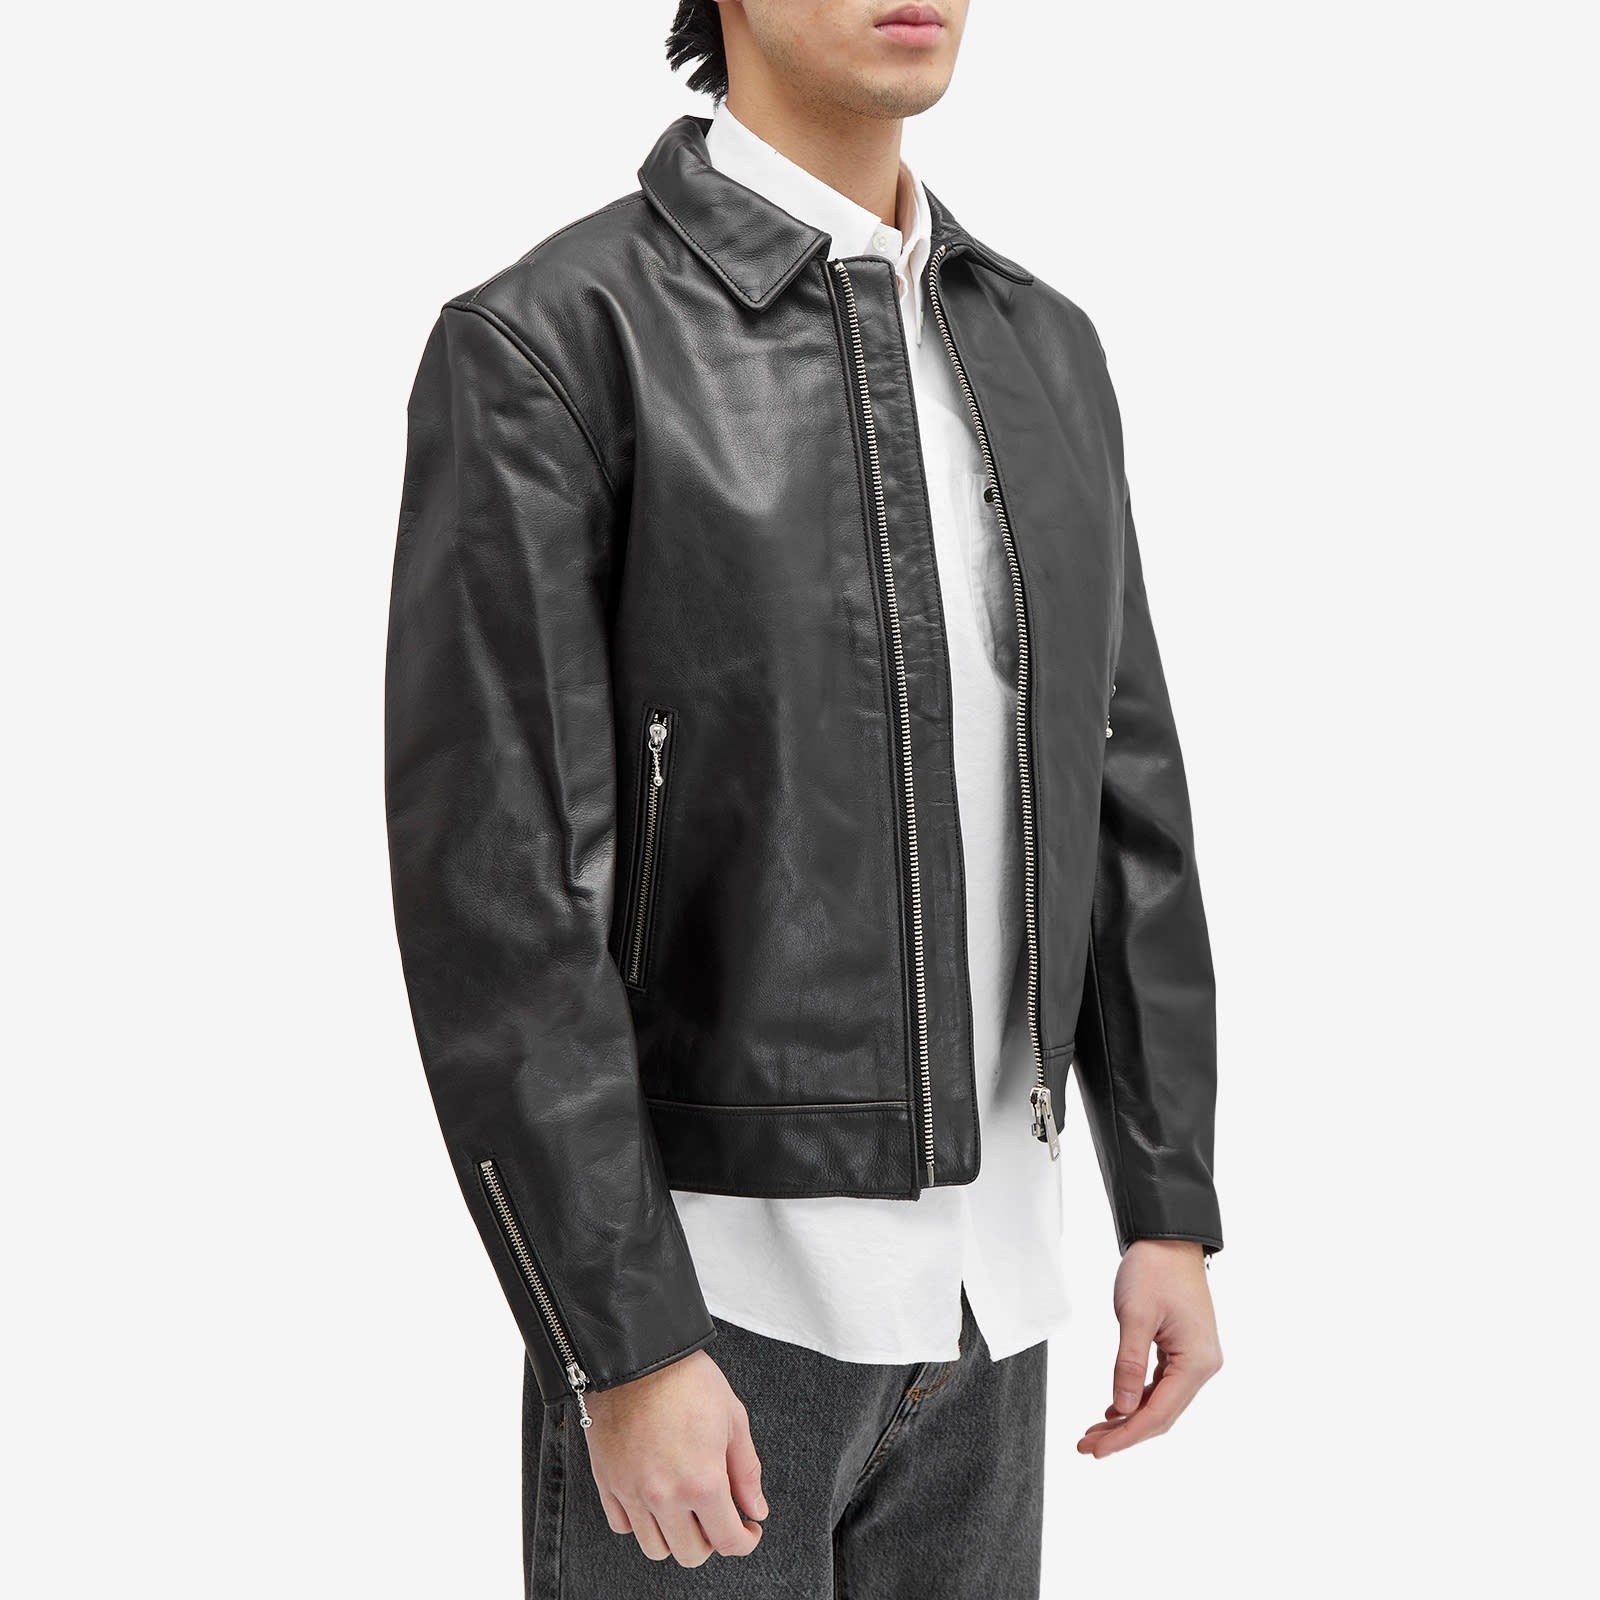 Nudie Jeans Co Eddy Rider Leather Jacket - 2